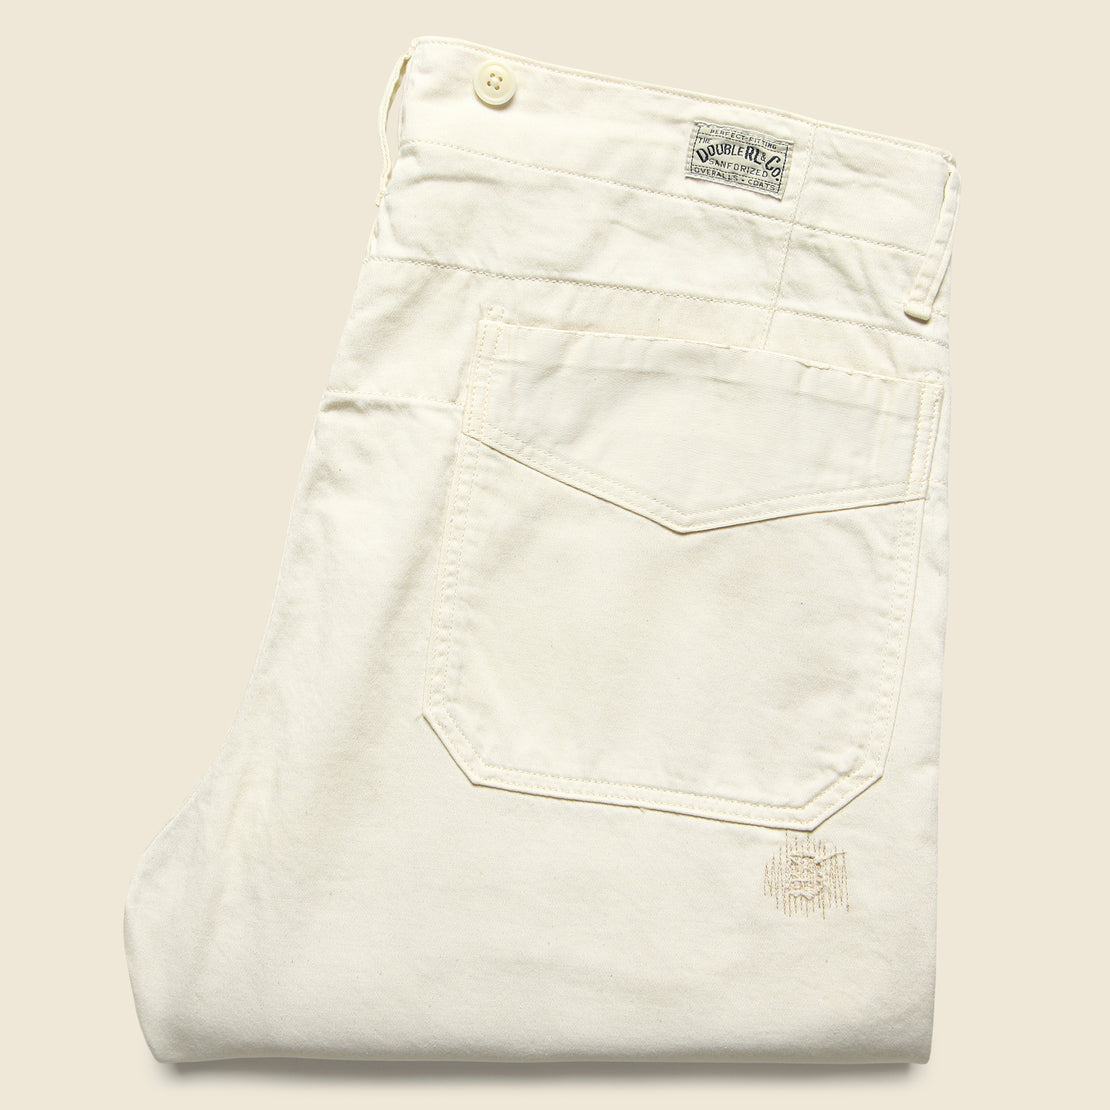 Mathieu Work Pant - Repaired Off White - RRL - STAG Provisions - Pants - Twill